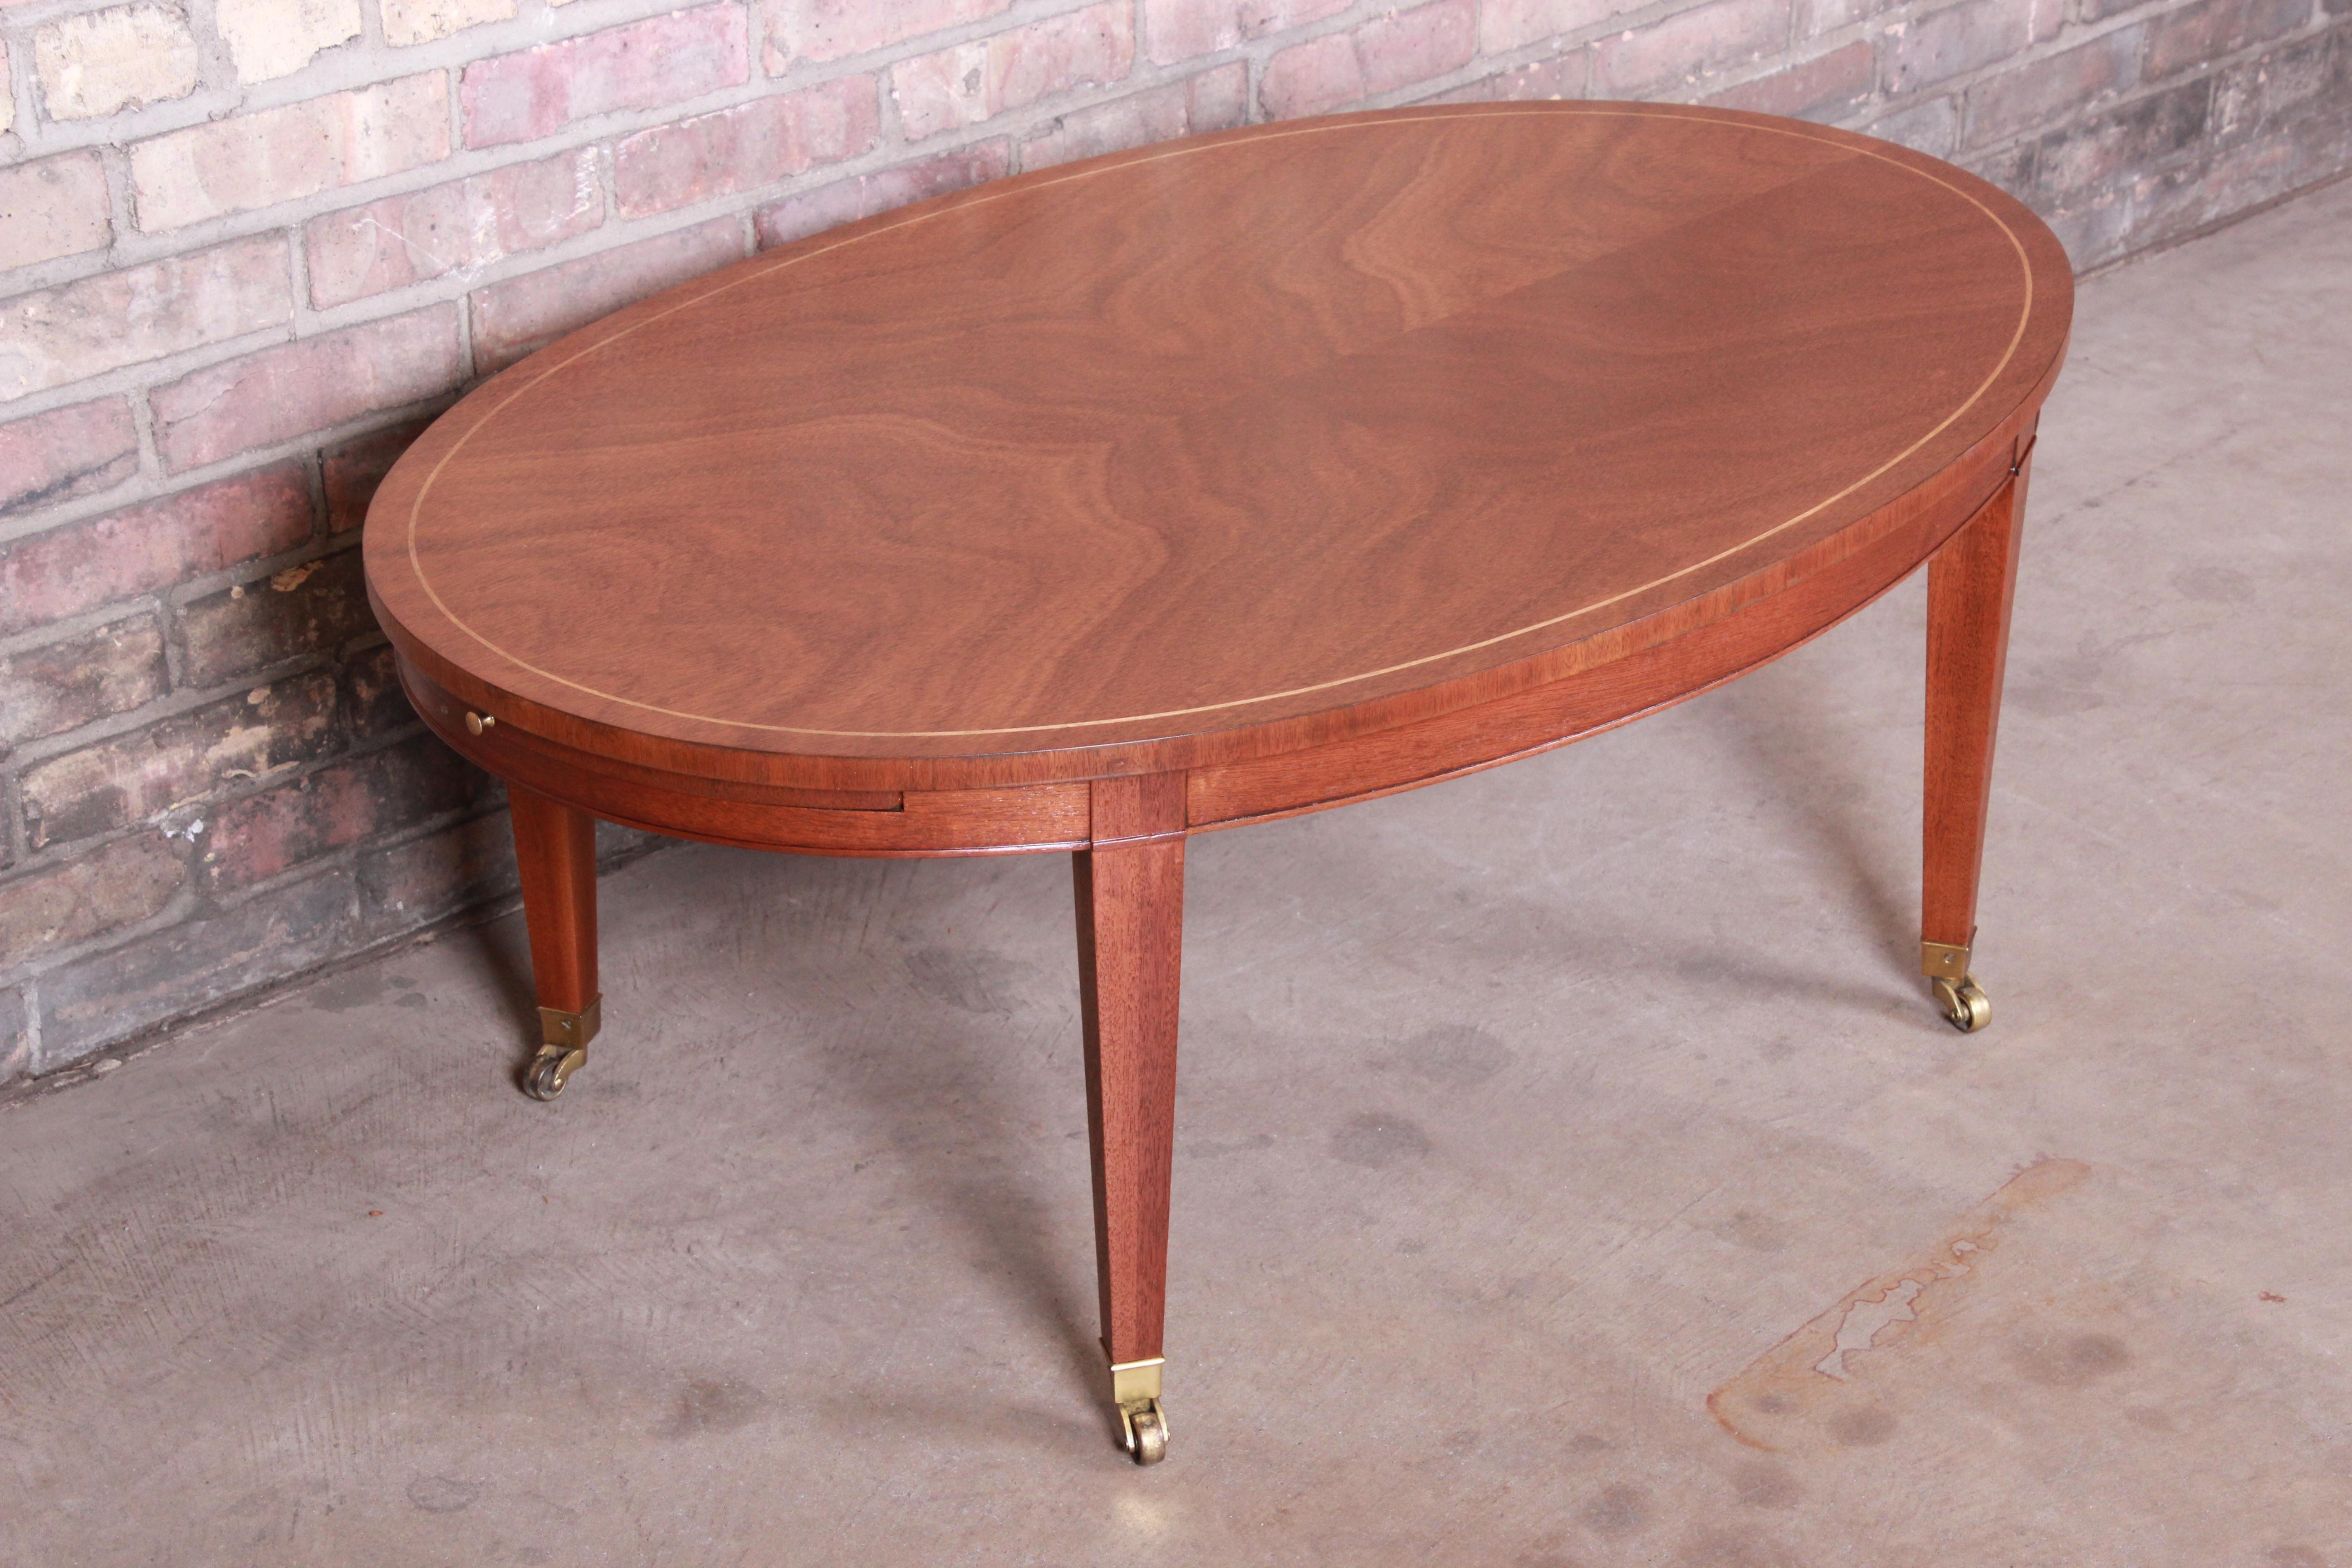 20th Century Baker Furniture Federal Mahogany Oval Coffee Table, Newly Refinished